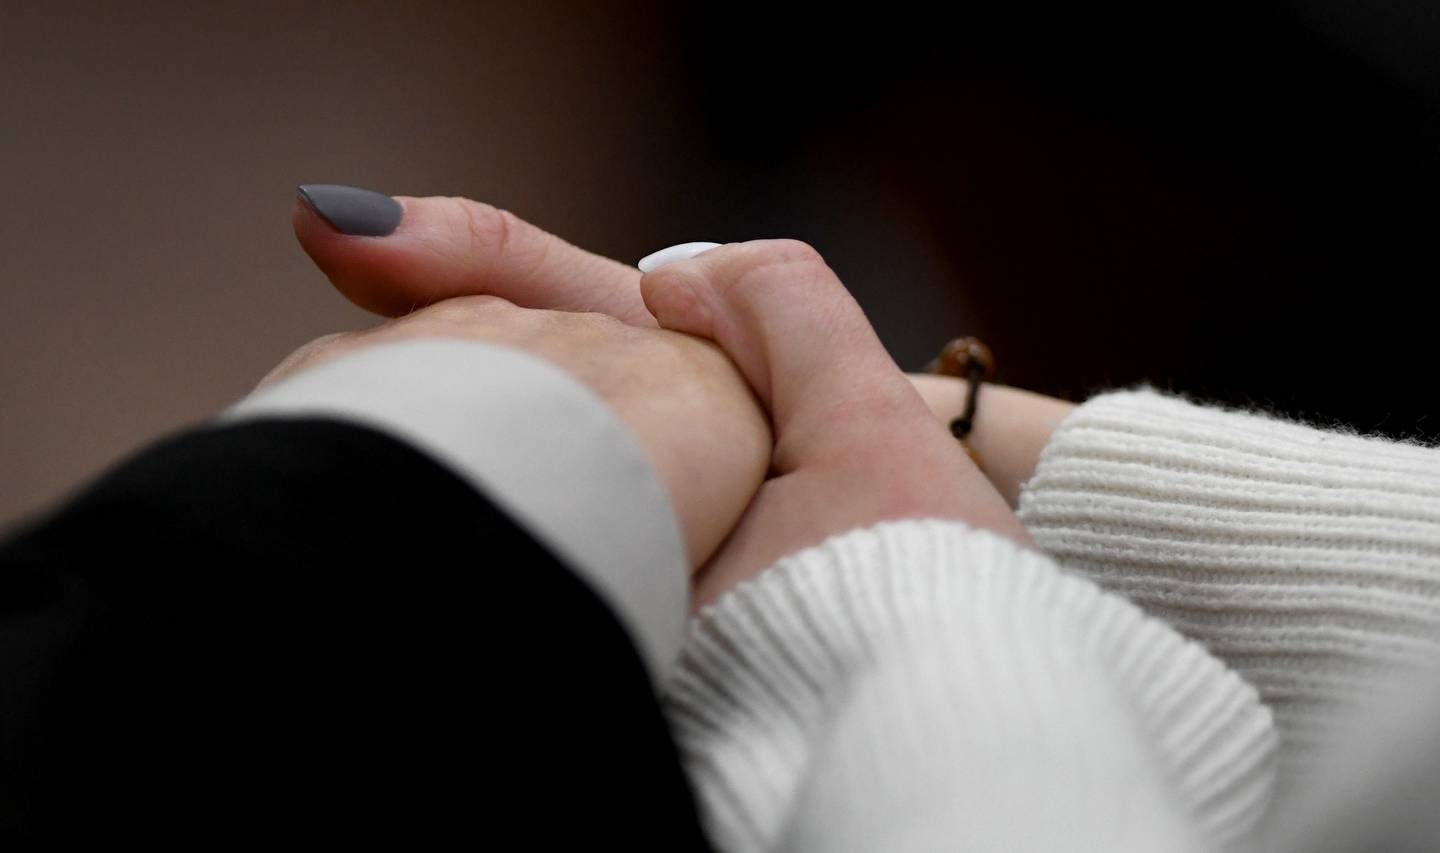 Brett Herold and his girlfriend hold hands while waiting for his sentence to be handed down Friday, Feb. 18, 2022, at the McHenry County Courthouse in Woodstock. Herold pleaded guilty in October to driving under the influence and failing to report a fatal crash.